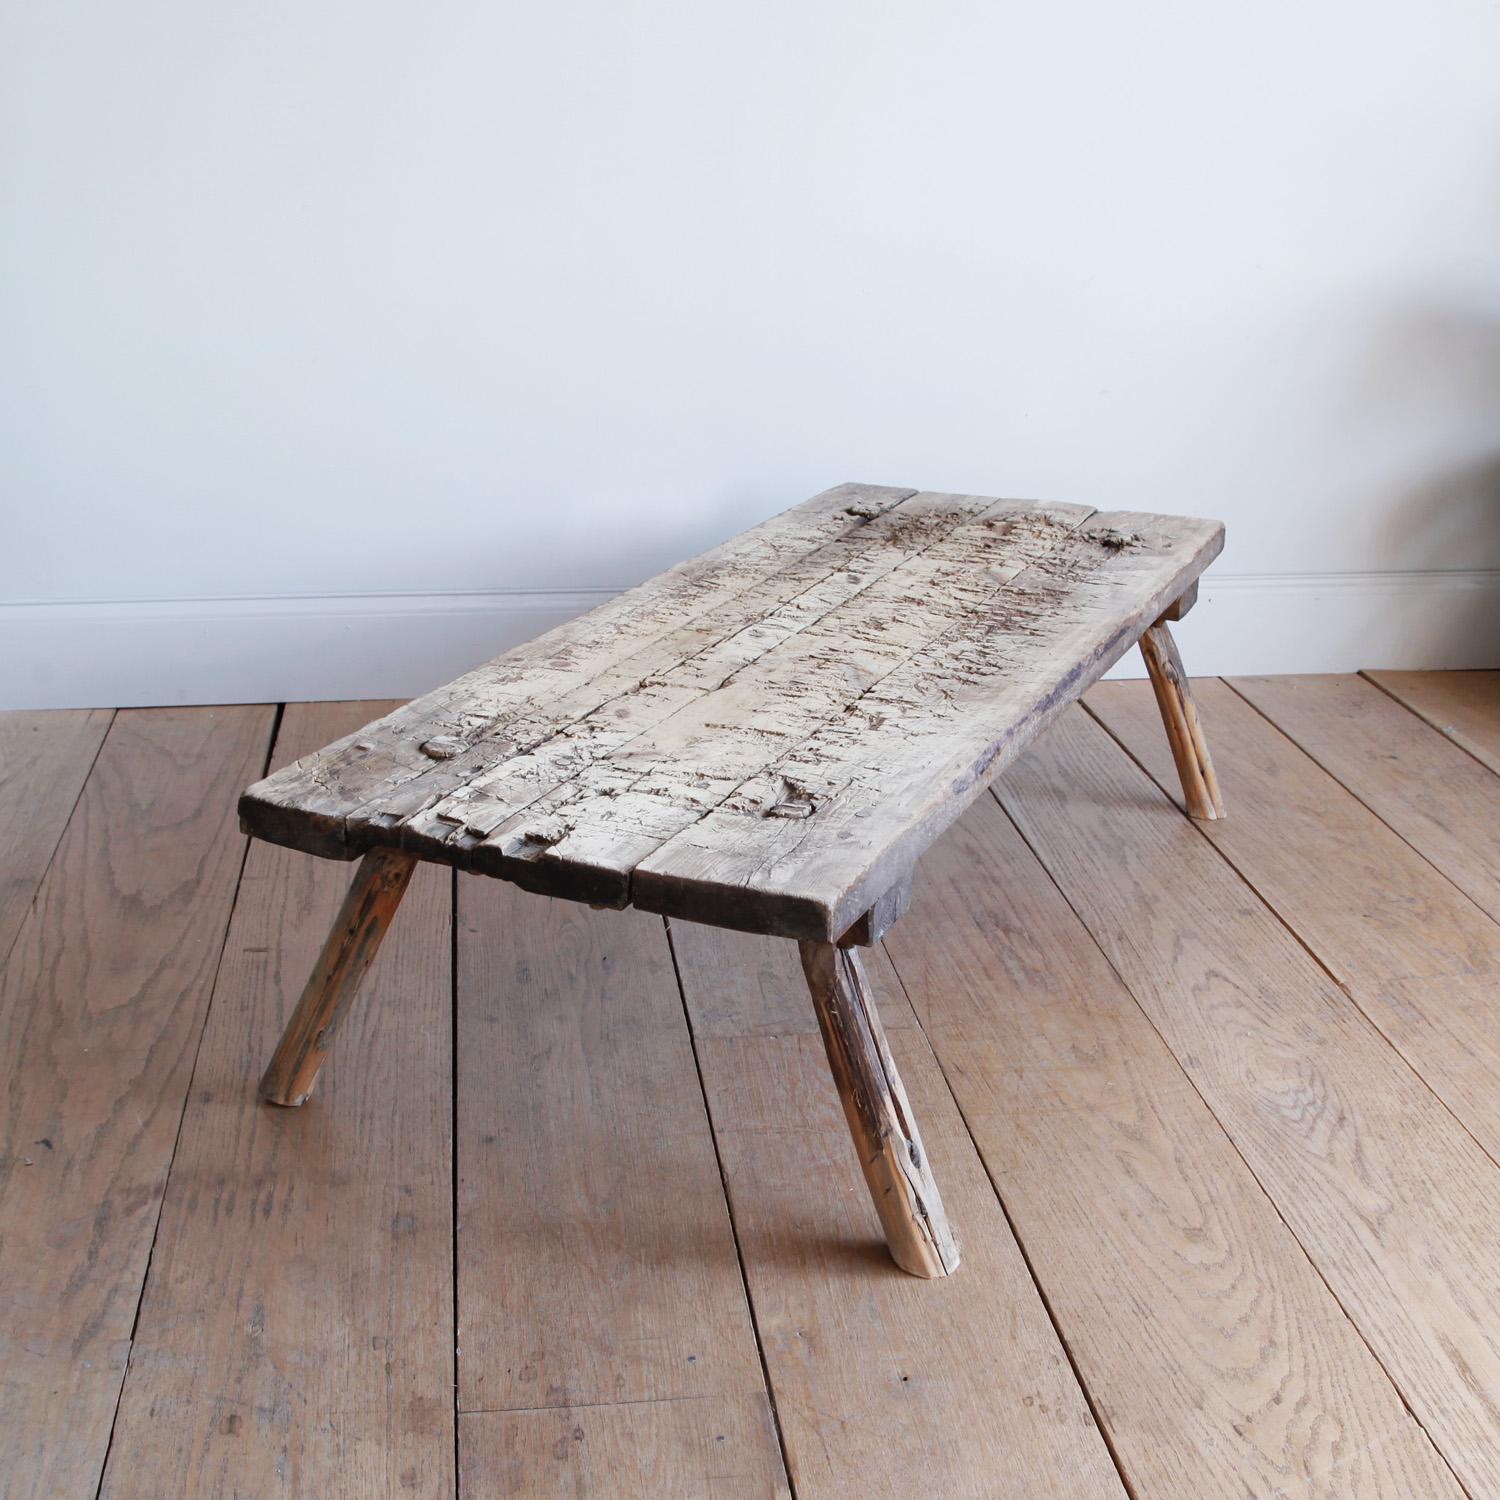 We love the rough-hewn hand-built utilitarian furniture of this period, marked with generations of use and lending a rustic, wabi sabi elegance to any interior.

This long coffee table with its splayed legs and wooden peg joinery has an almost